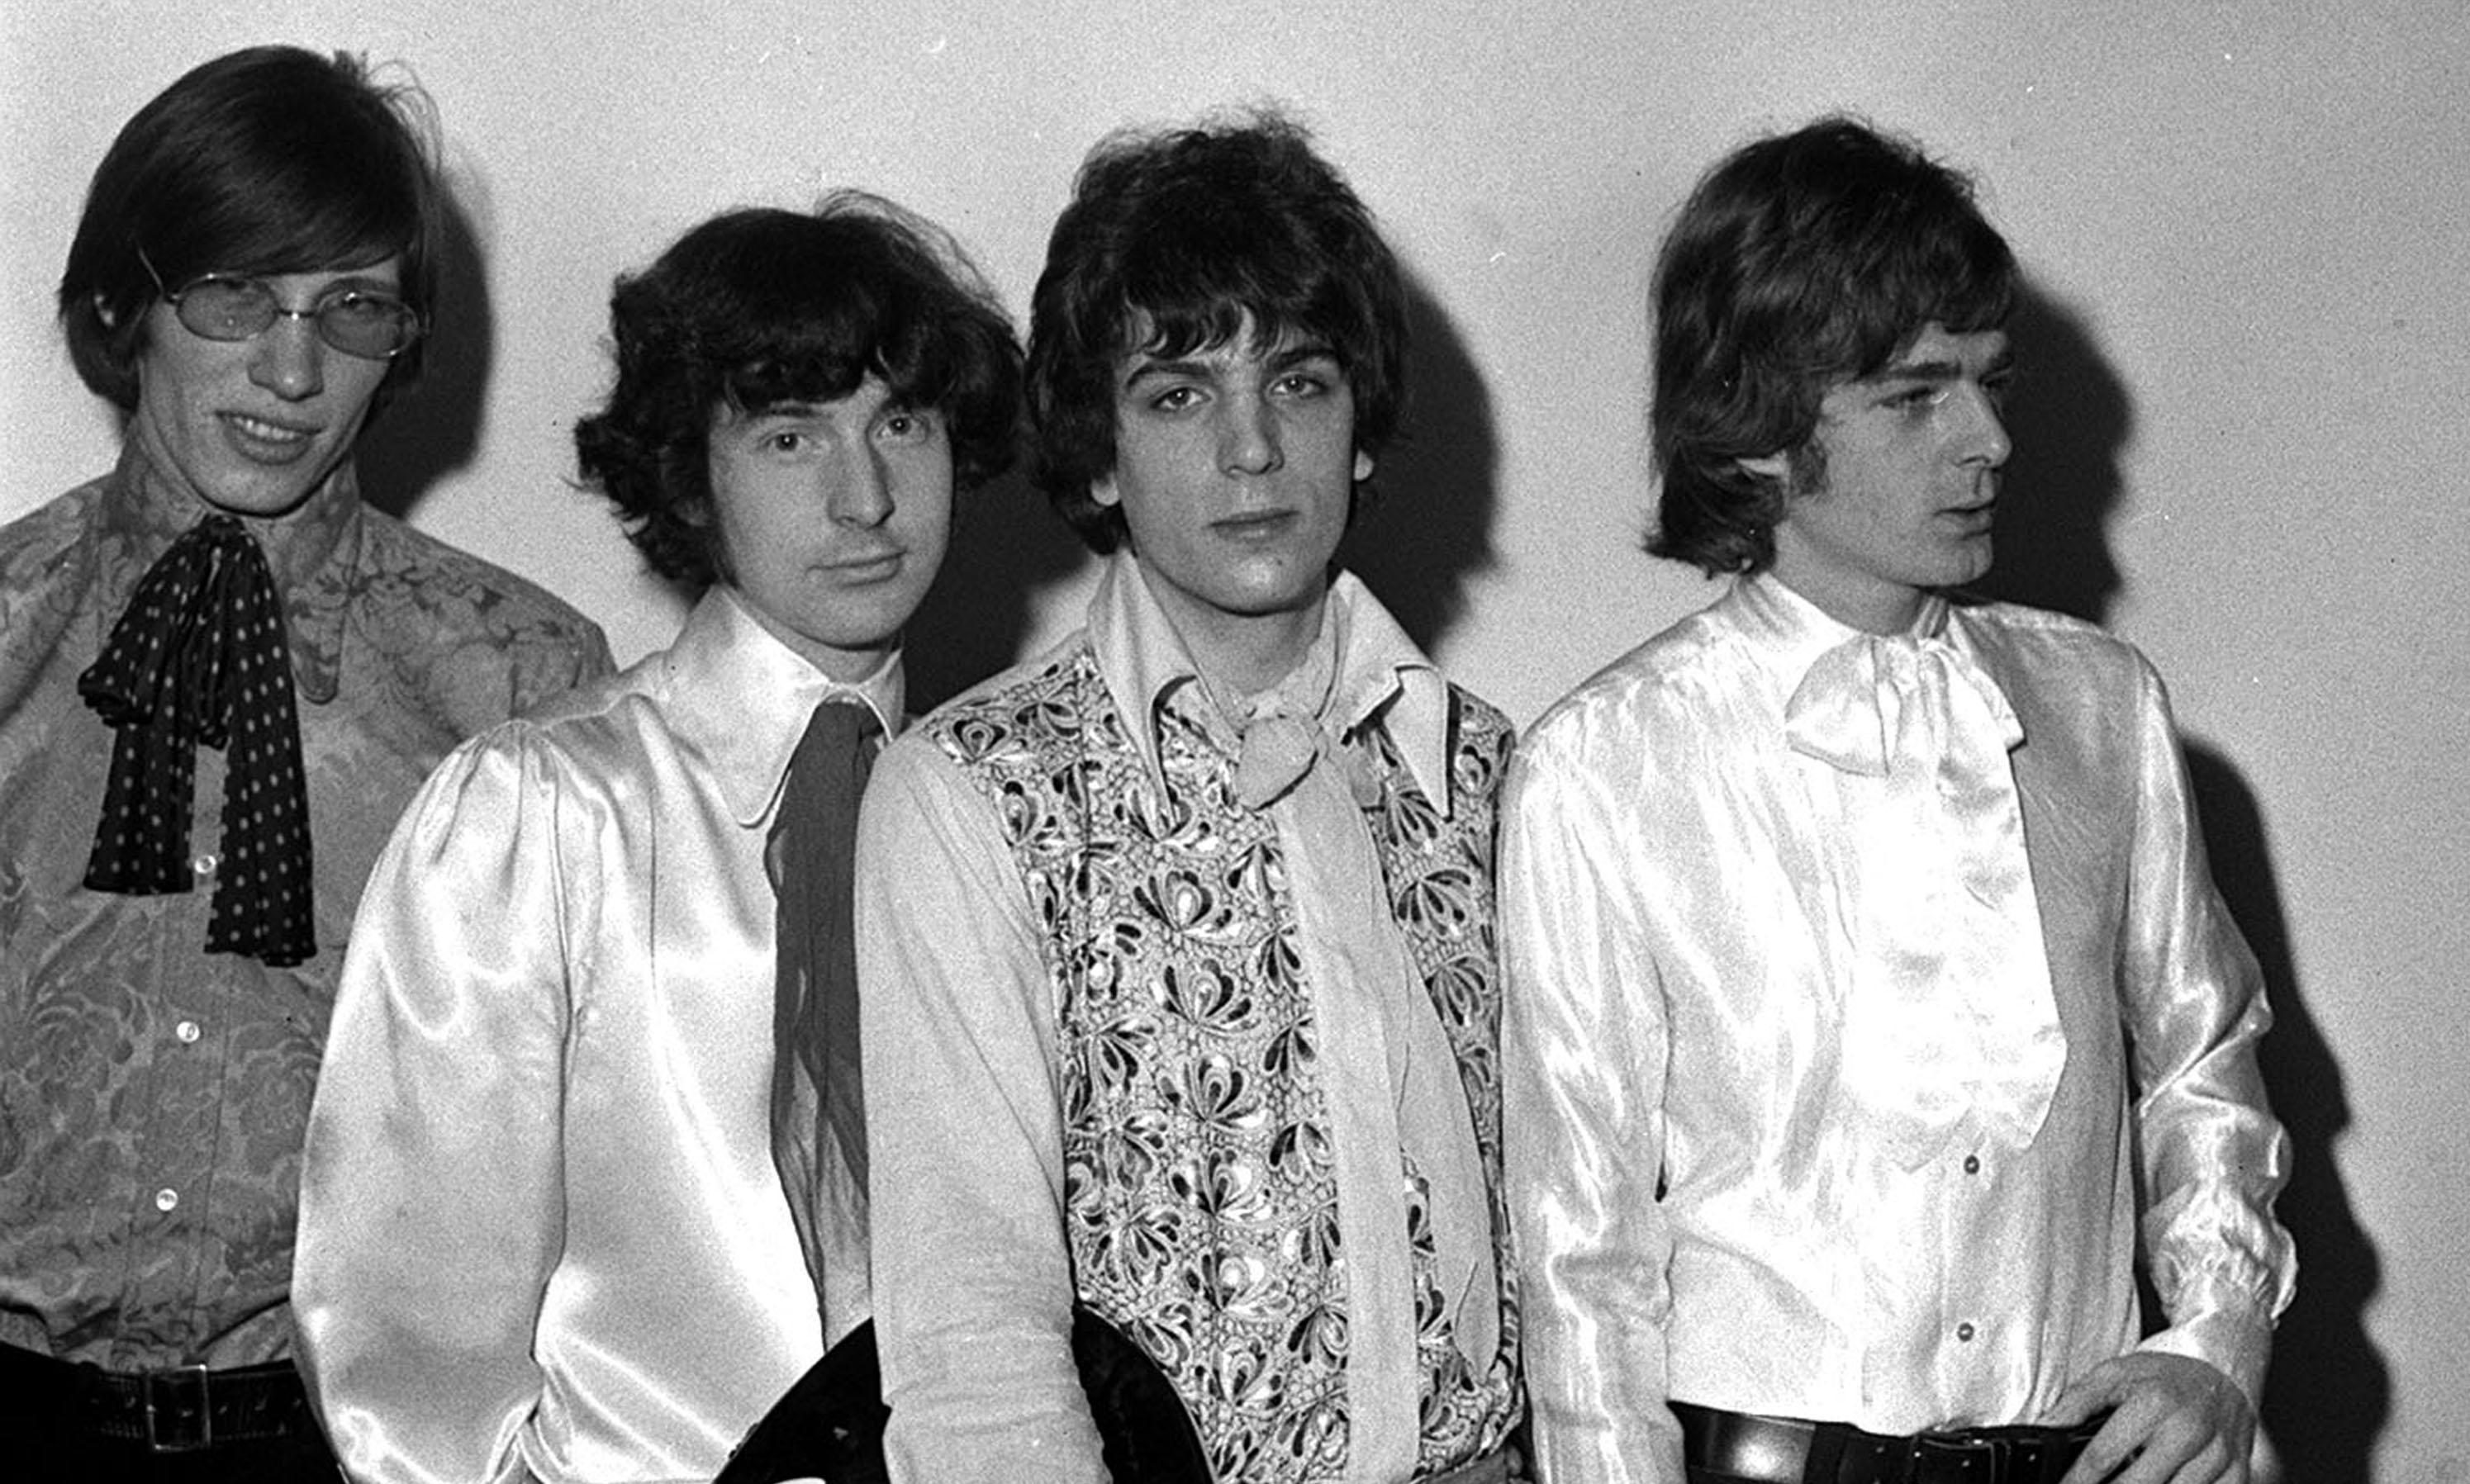 Pink Floyd members Roger Waters, Nick Mason, Syd Barrett and Rick Wright in 1967.